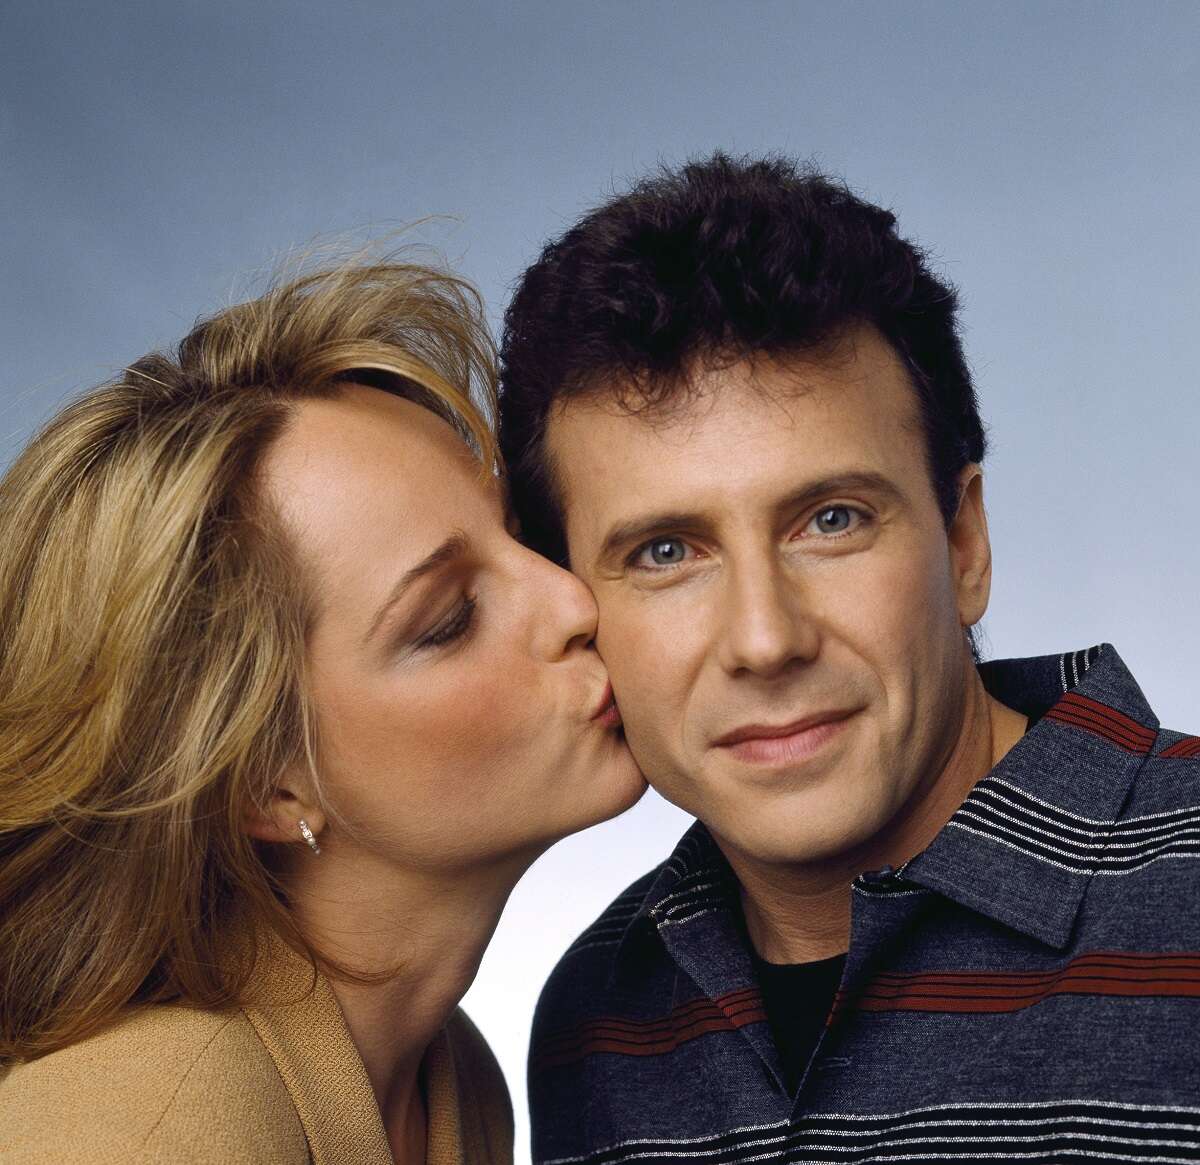 Helen Hunt and Paul Reiser as Jamie and Paul Buchman in a promotional photo for 'Mad About You'